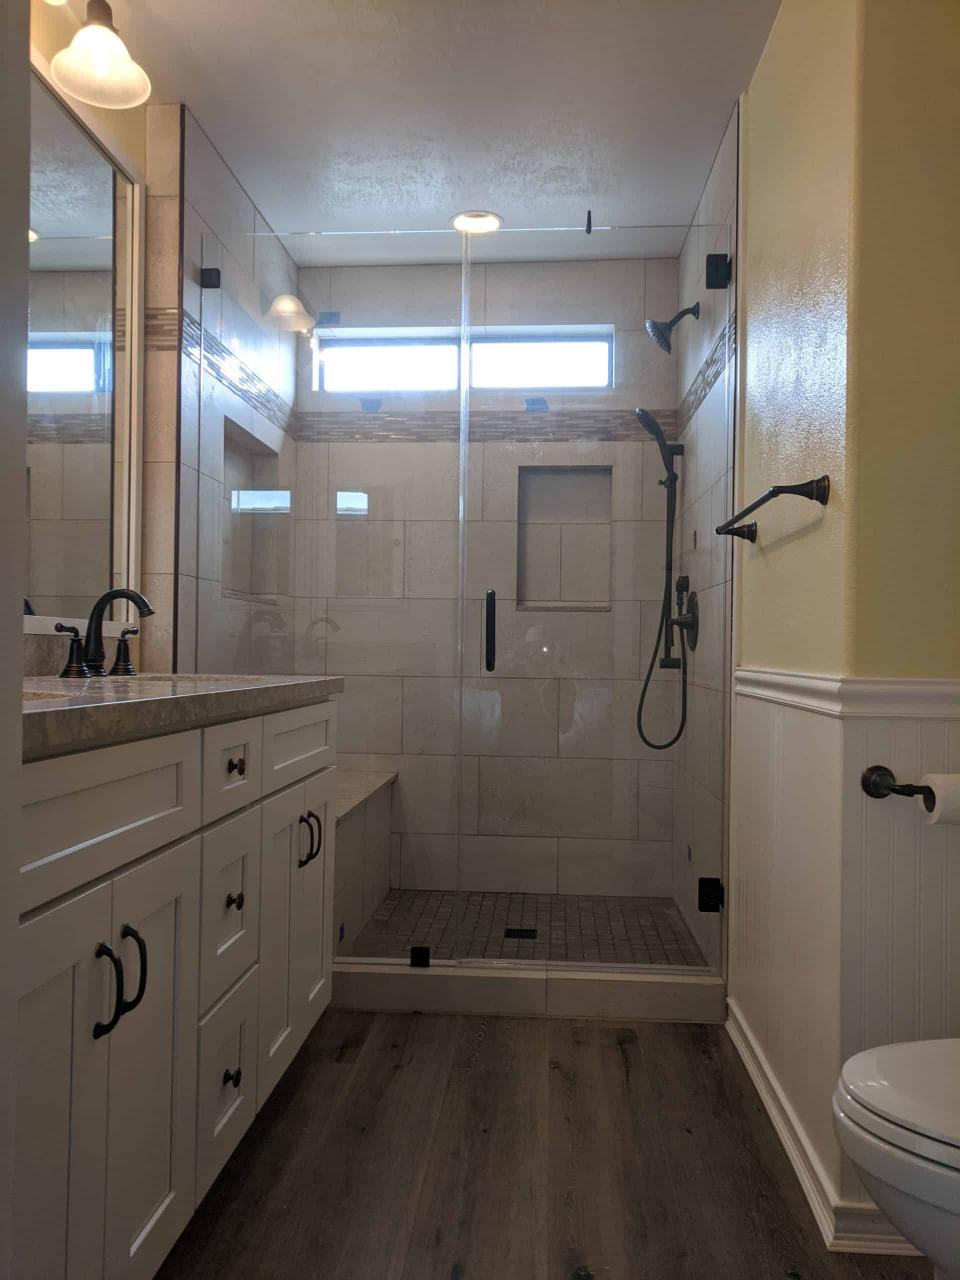 How Much Does It Cost to Upgrade A Bathroom In Temecula Valley?